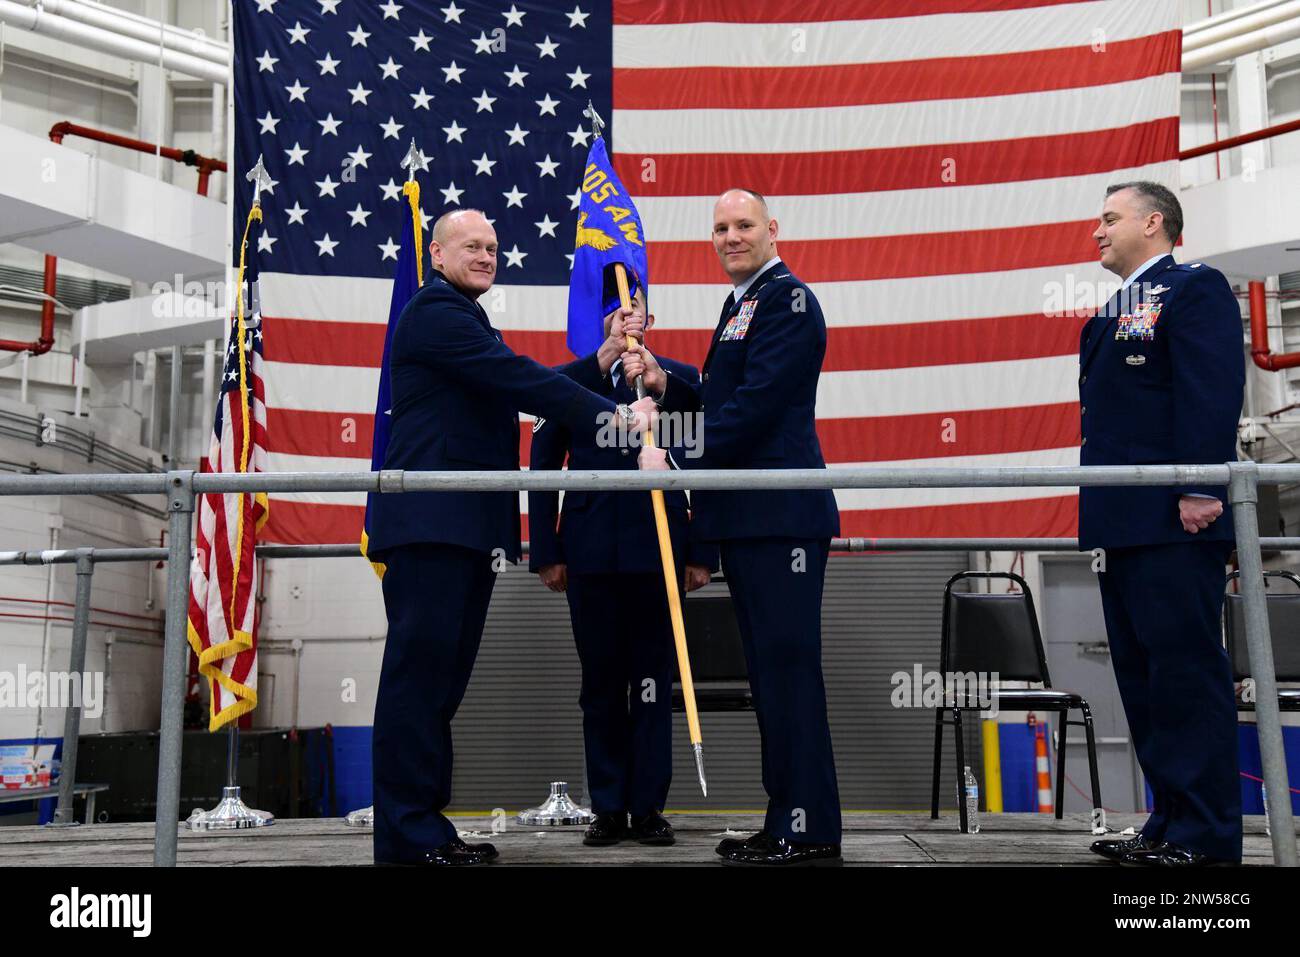 U.S. Air Force Col. Edward W. Cook Jr., the outgoing Commander of the 105th Mission Support Group, relinquishes command facilitated by U.S. Air Force Brig. Gen. Gary R. Charlton II, Commander of the 105th Airlift Wing, during the 105th MSG change of command ceremony at Stewart Air National Guard Base, New York, January 8, 2023. Stock Photo